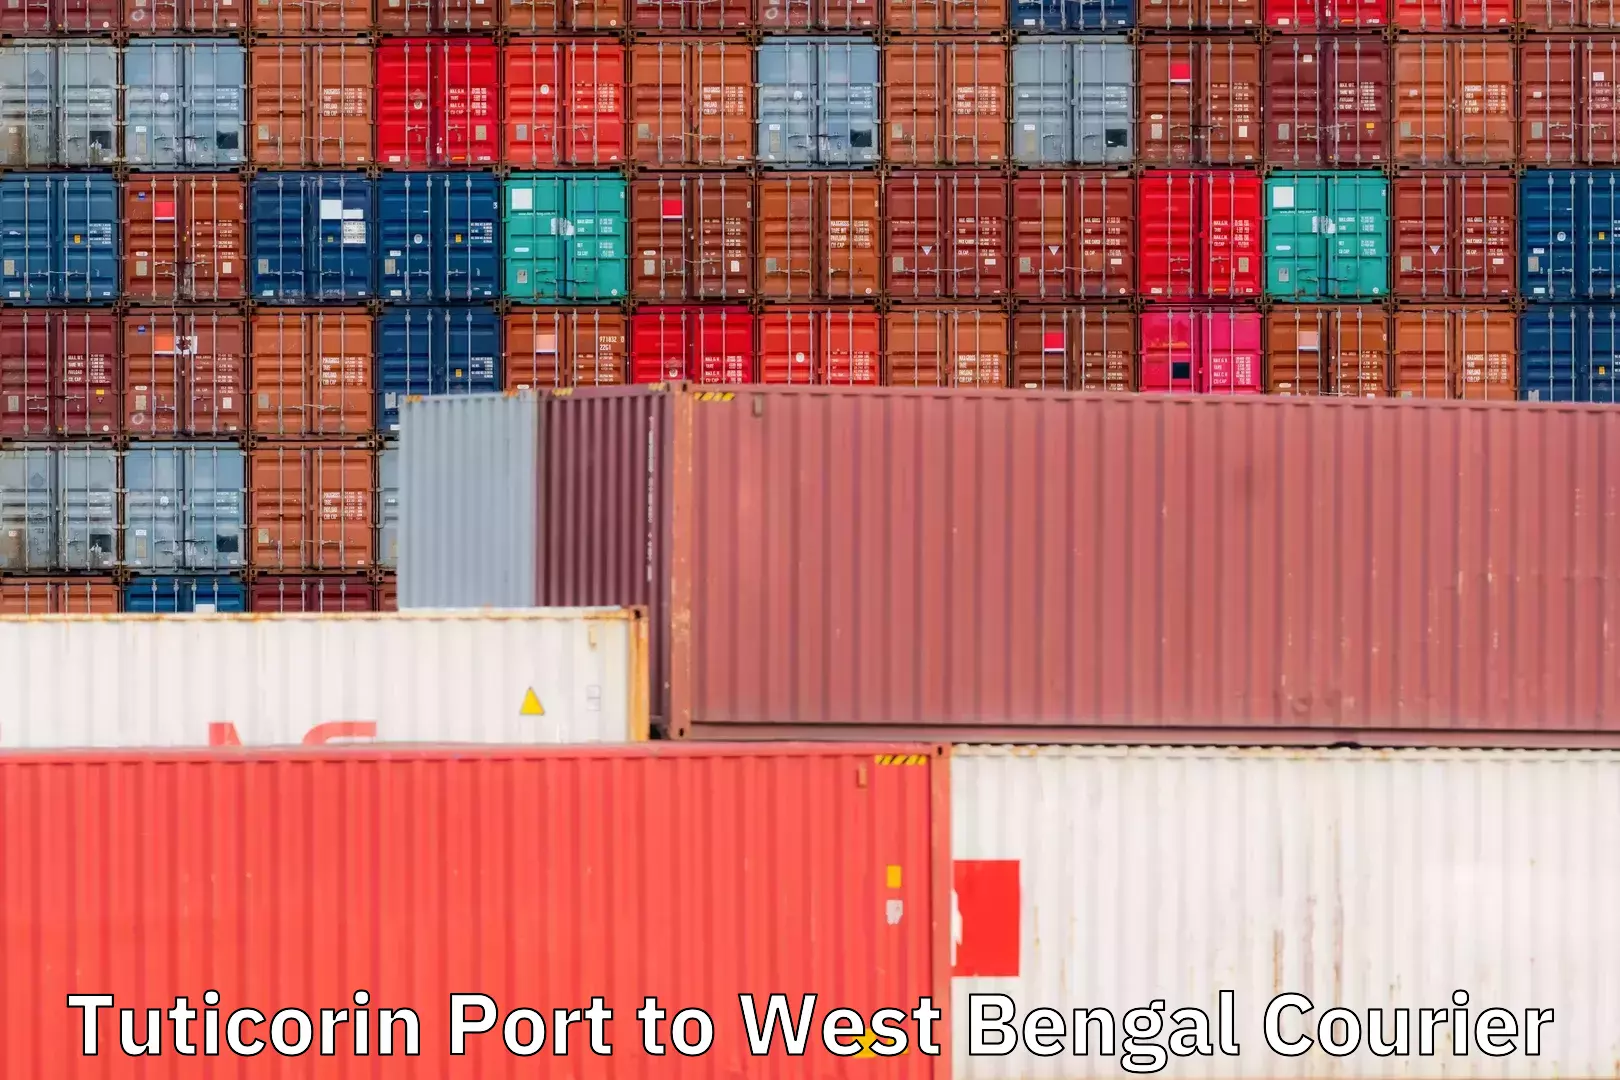 Express delivery network Tuticorin Port to West Bengal